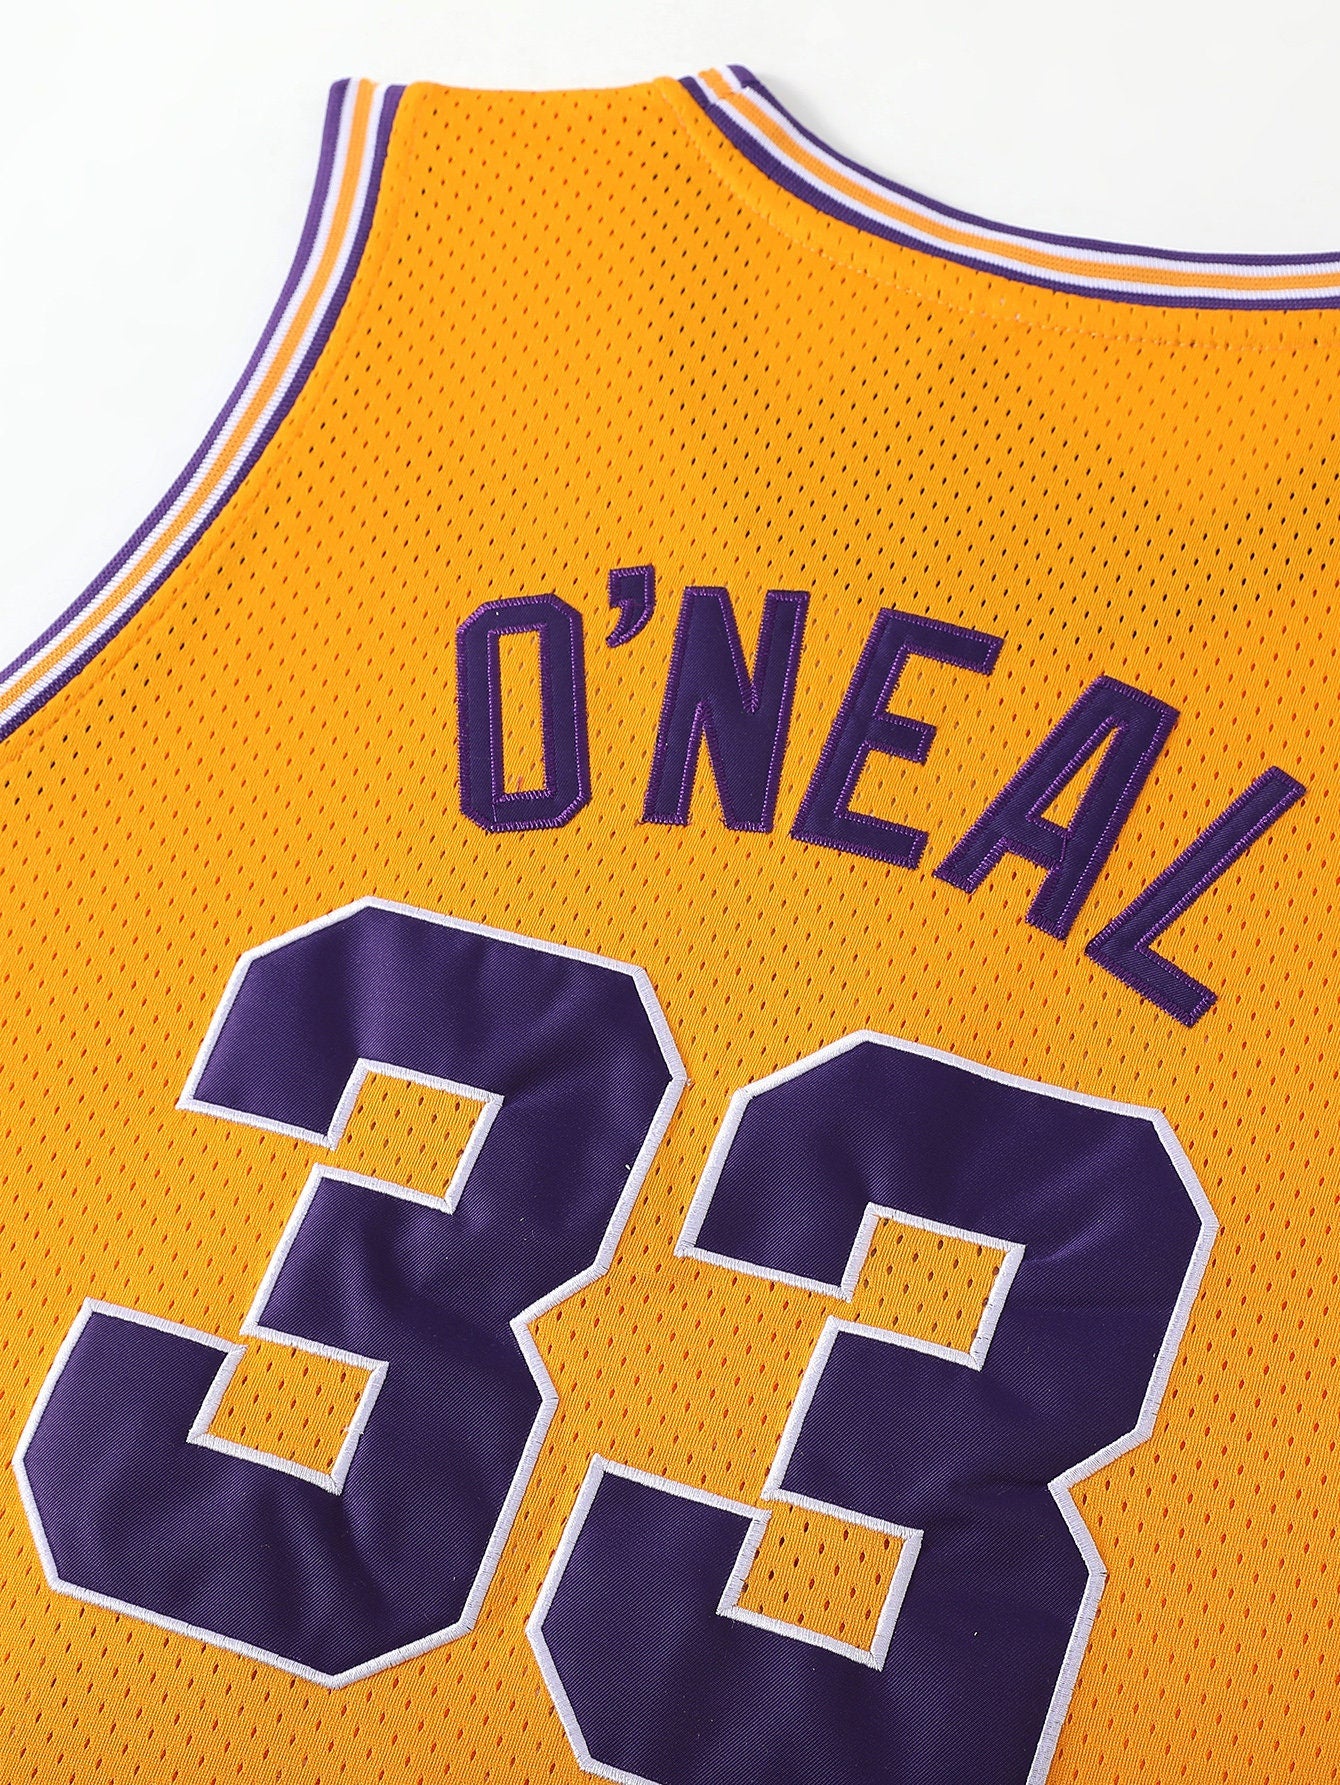 Shaquille O'Neal LSU Basketball Jersey College